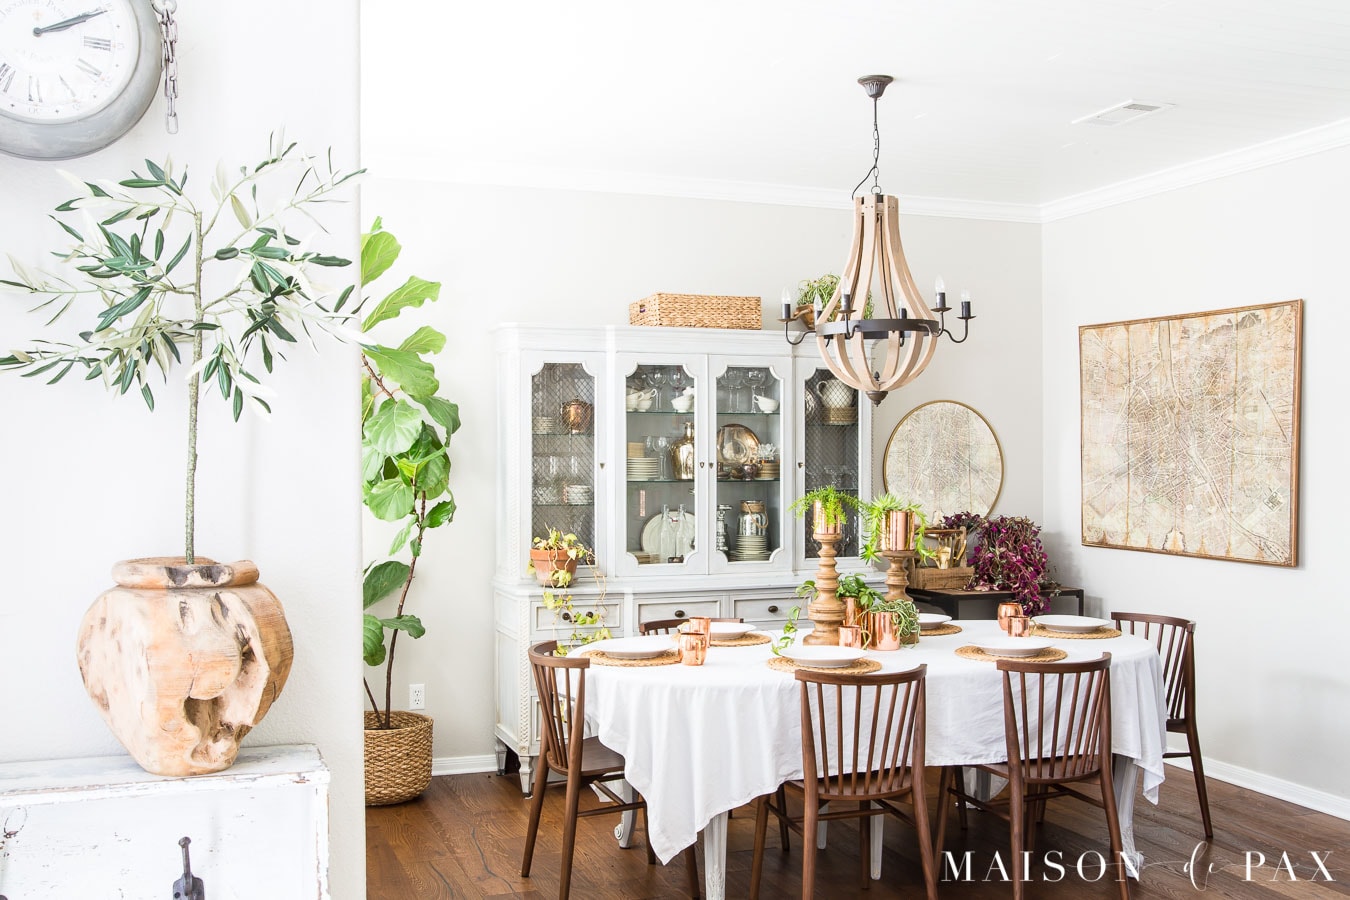 greenery as decor in a french farmhouse dining room | Maison de Pax